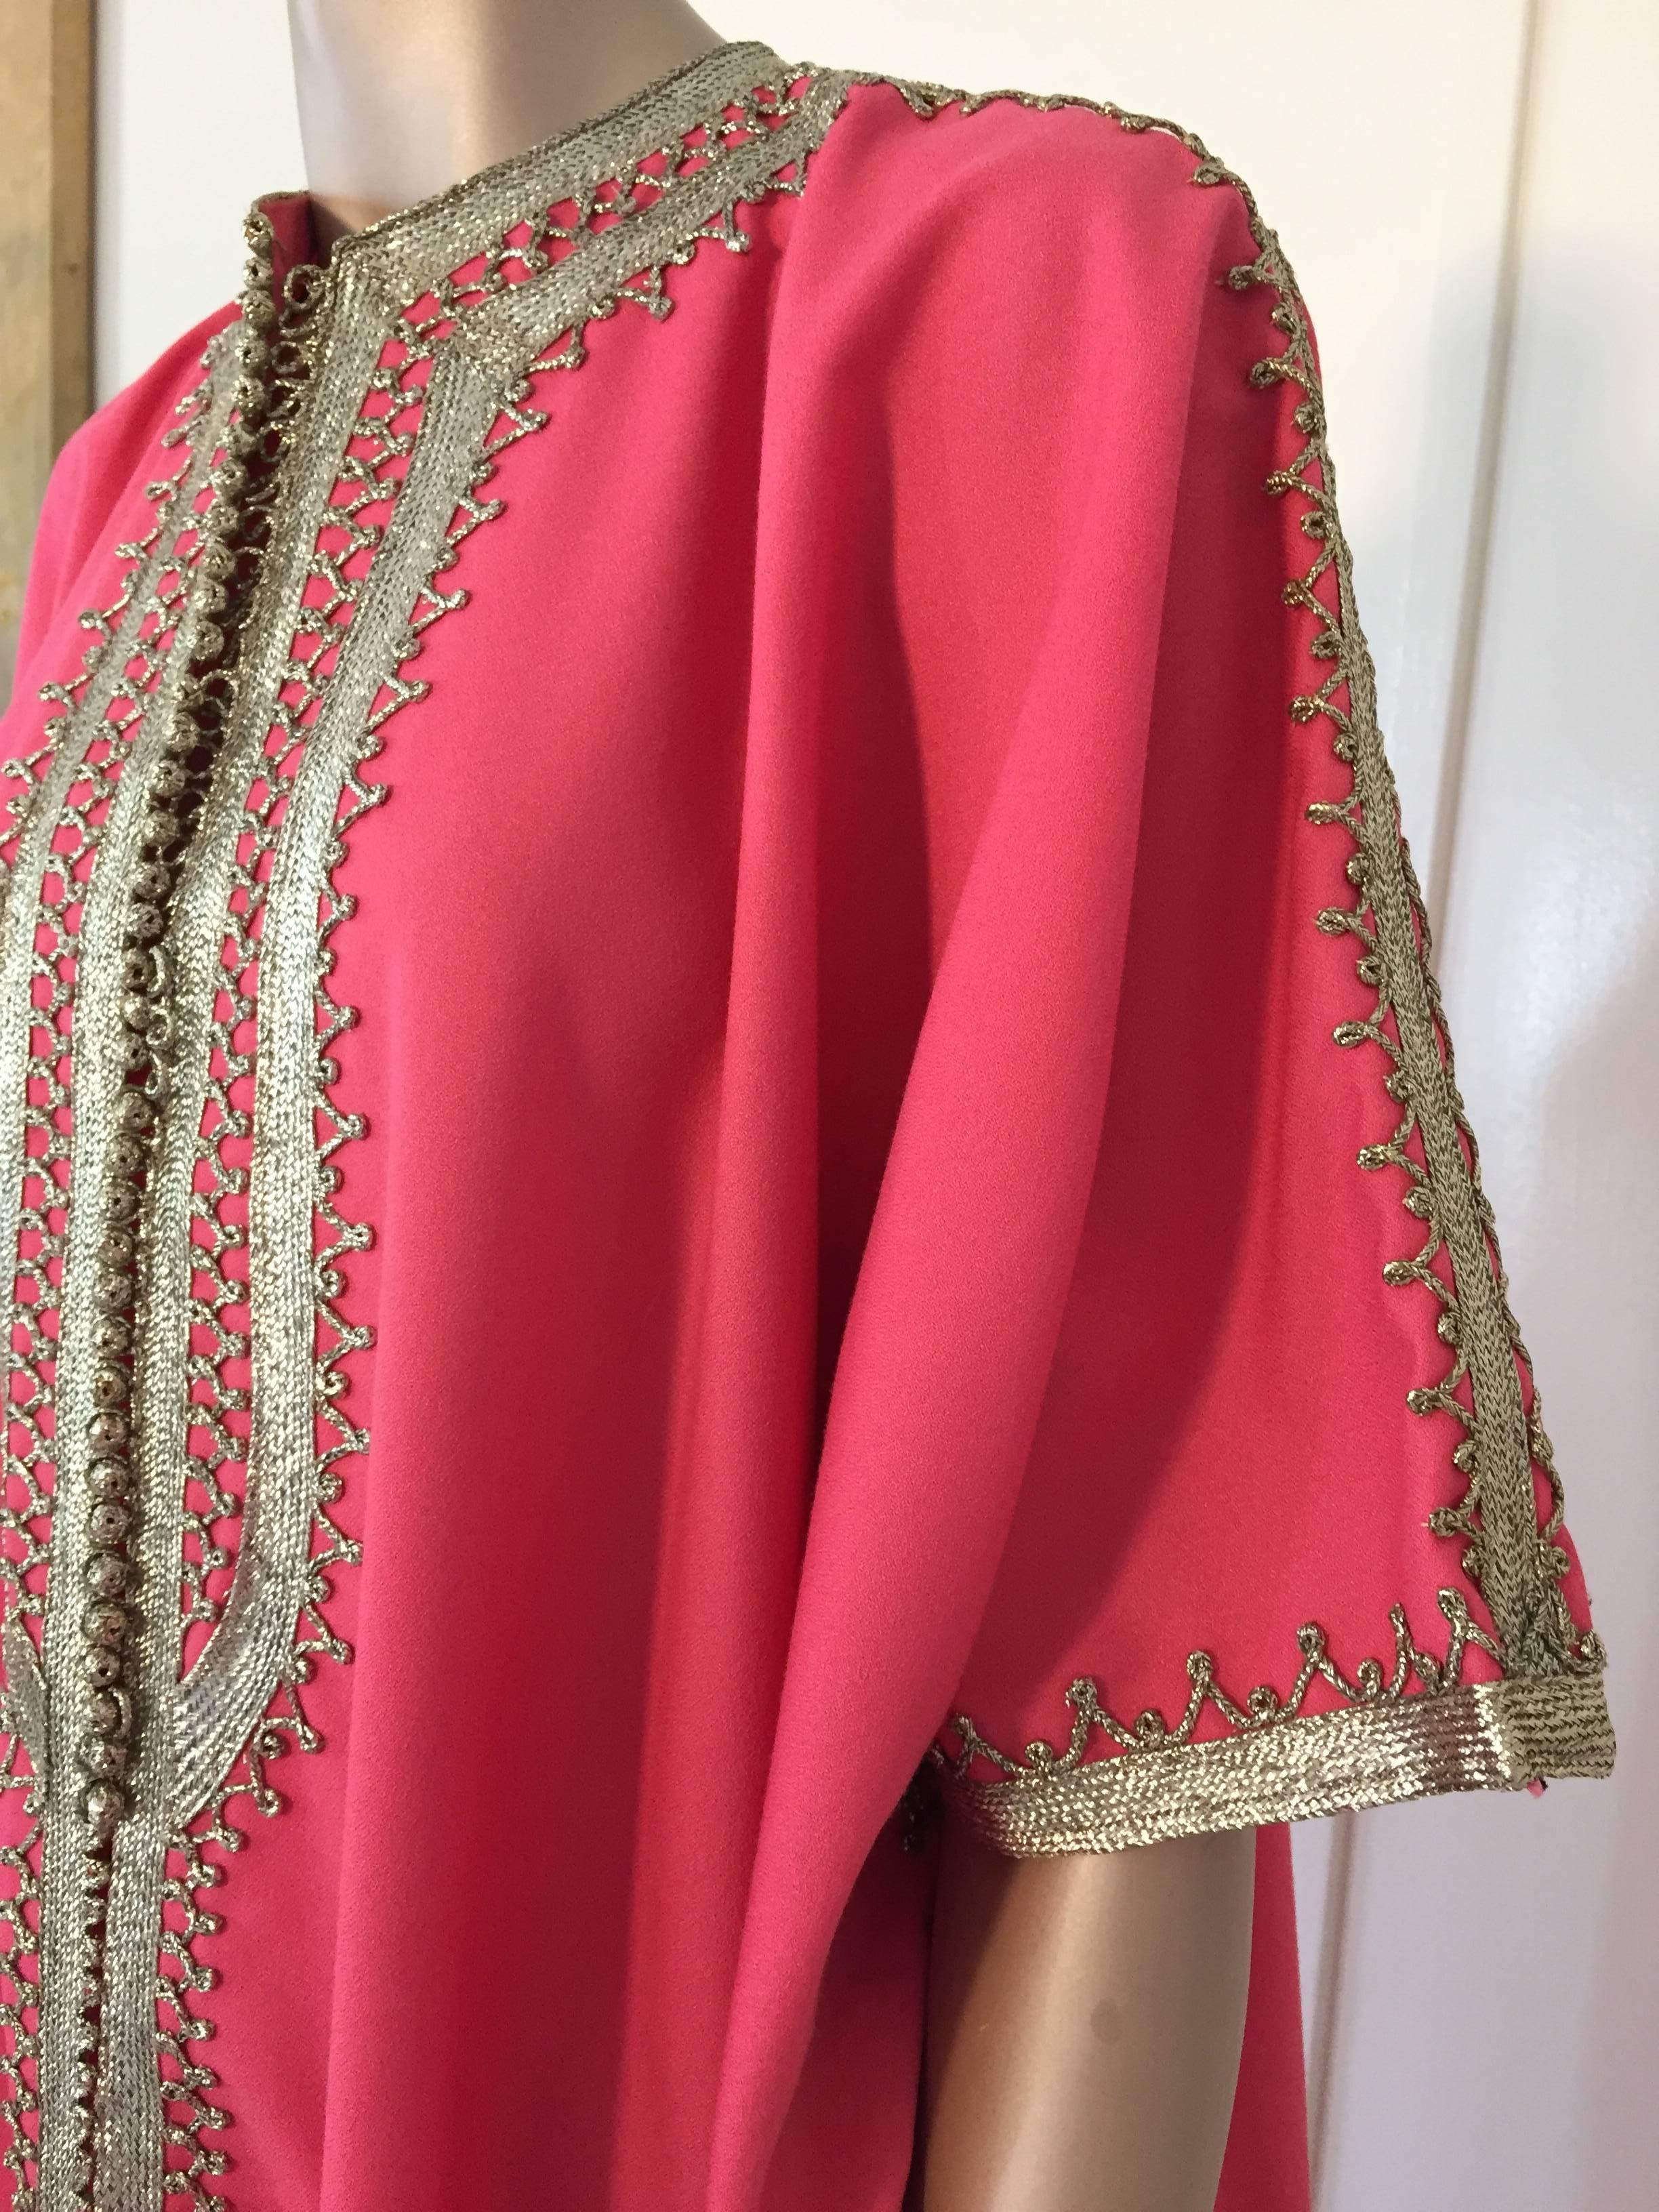 20th Century Moroccan Caftan Hot Pink Color Embroidered with Silver, Kaftan circa 1970 For Sale